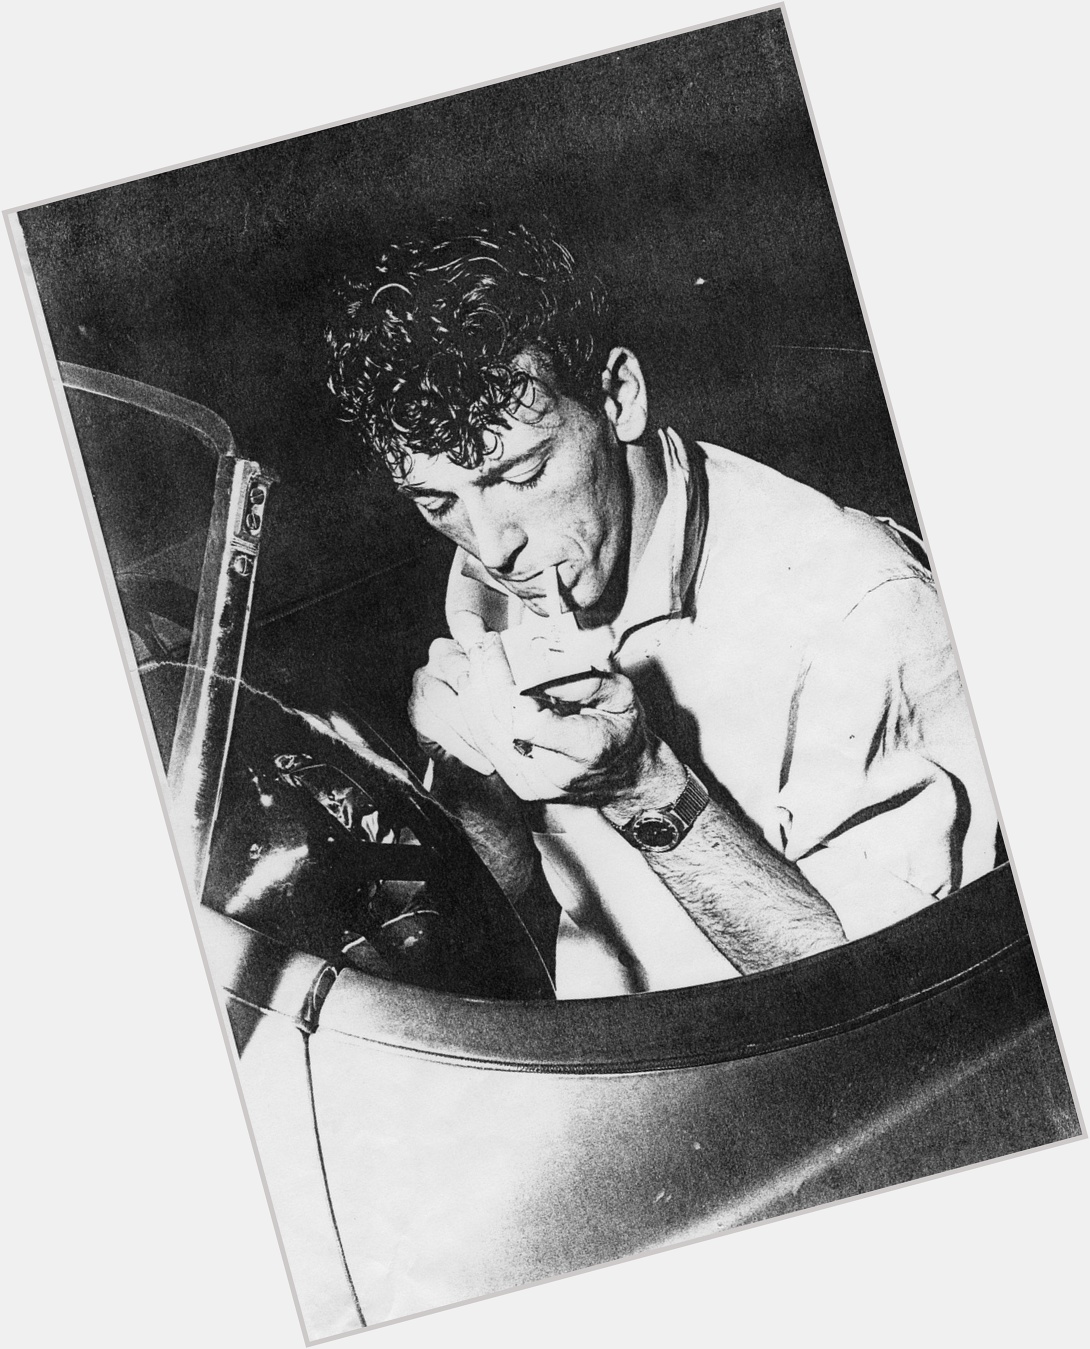 Happy Birthday to the Rock n\ roll legend Gene Vincent pkx 